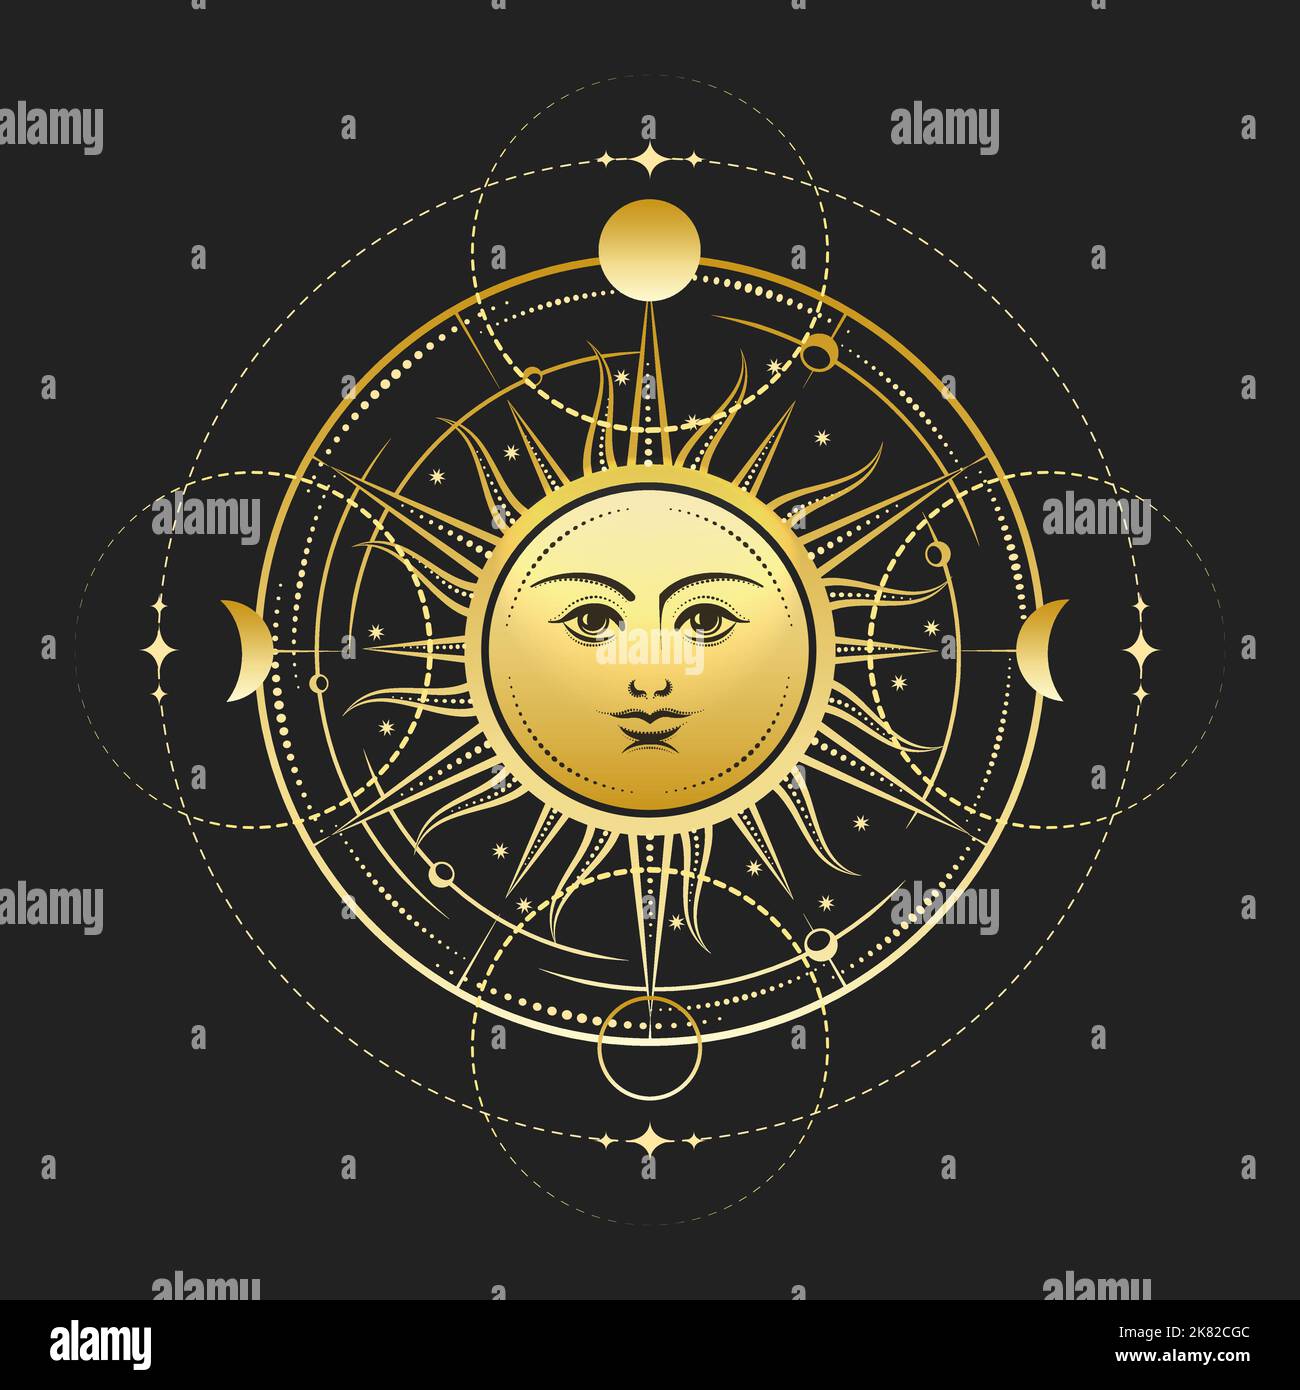 hi-res moon and - Decorative images photography Alamy stock sun